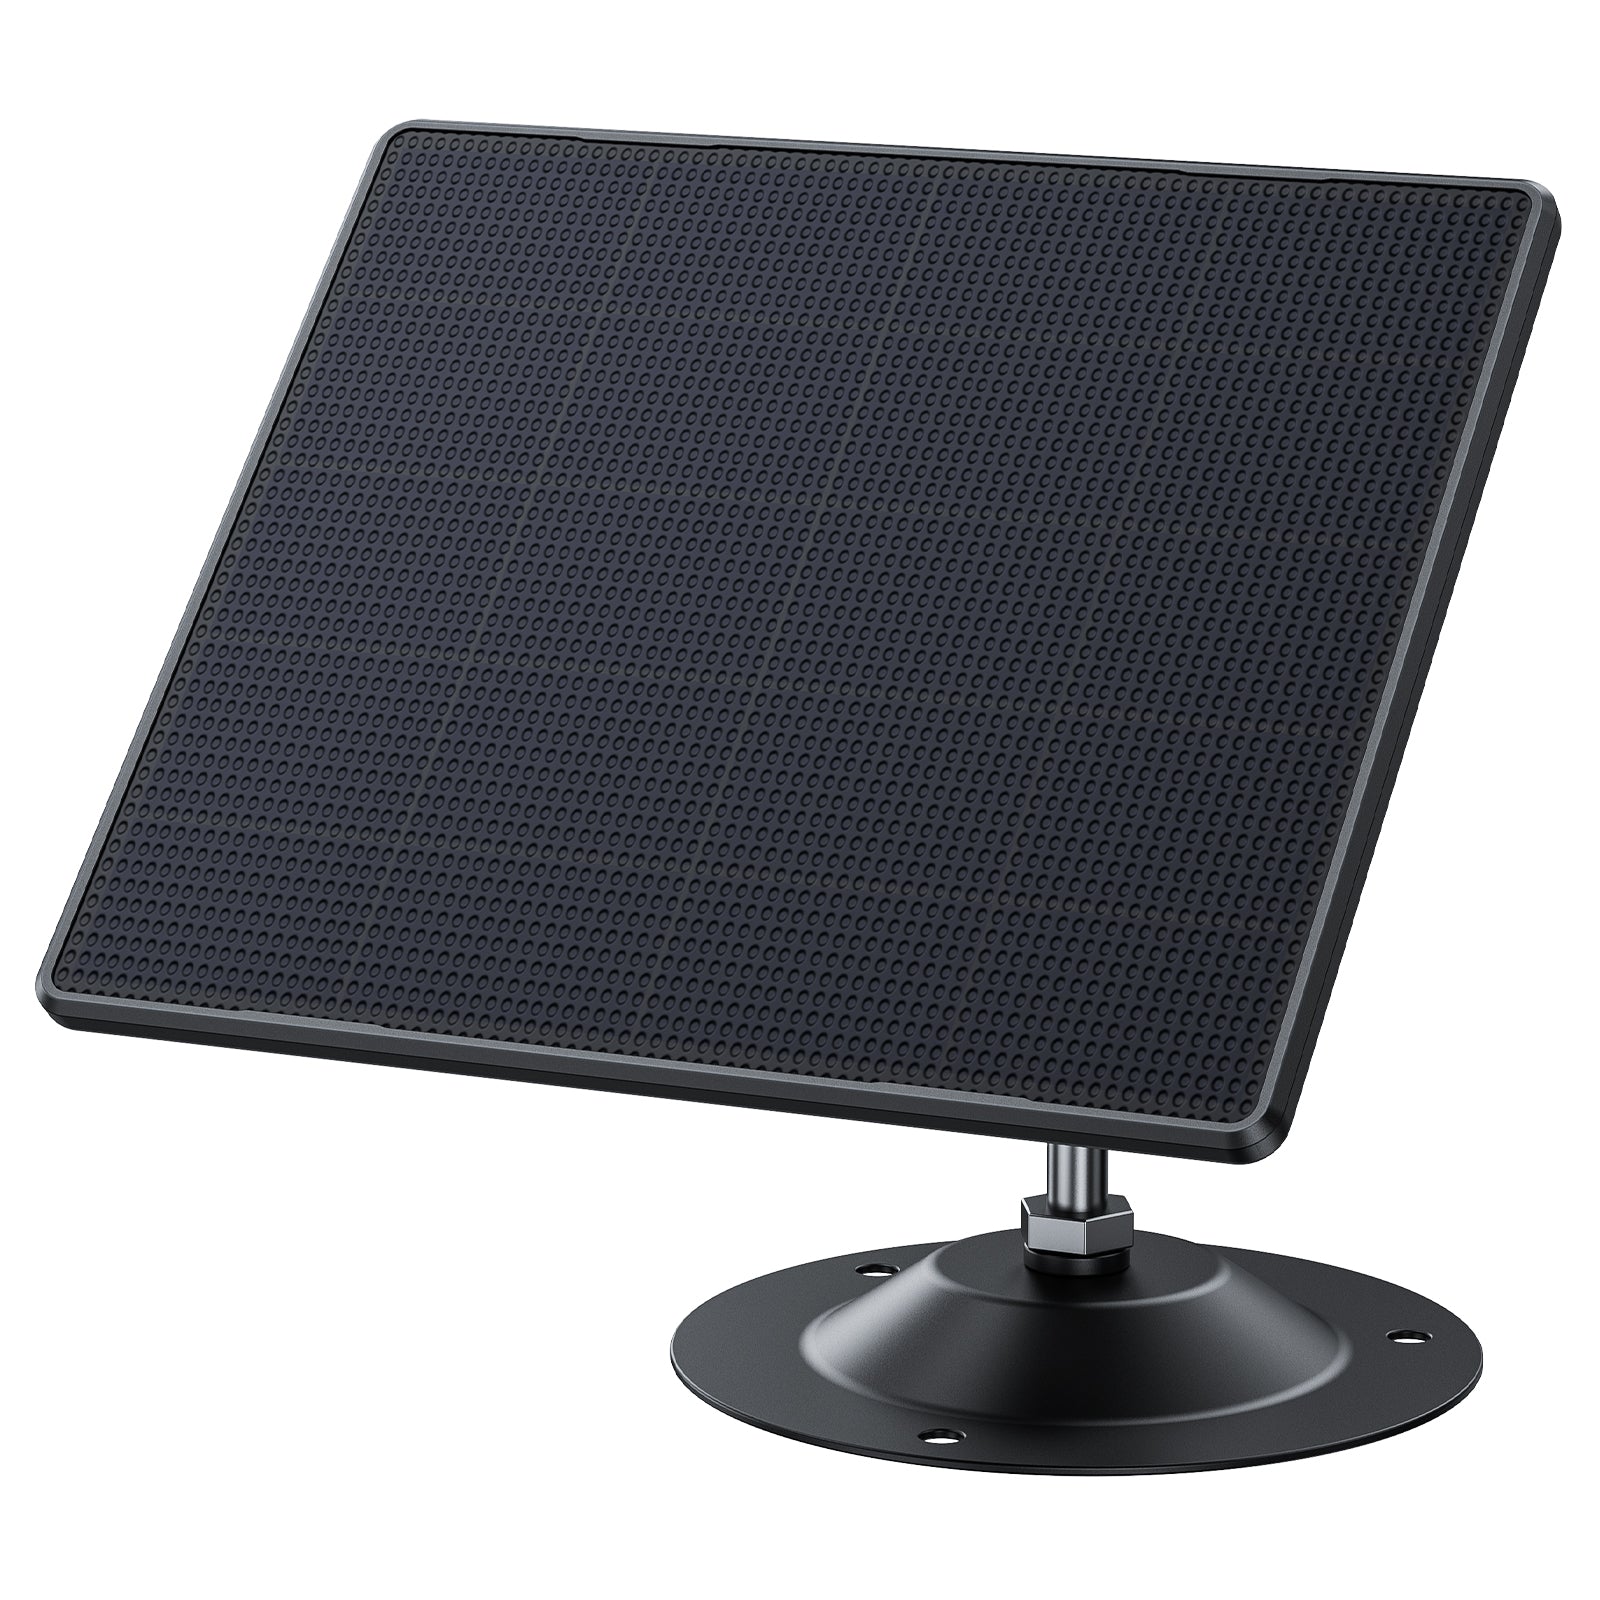 Solar Power Panel BC643 For Campark Trail Camera